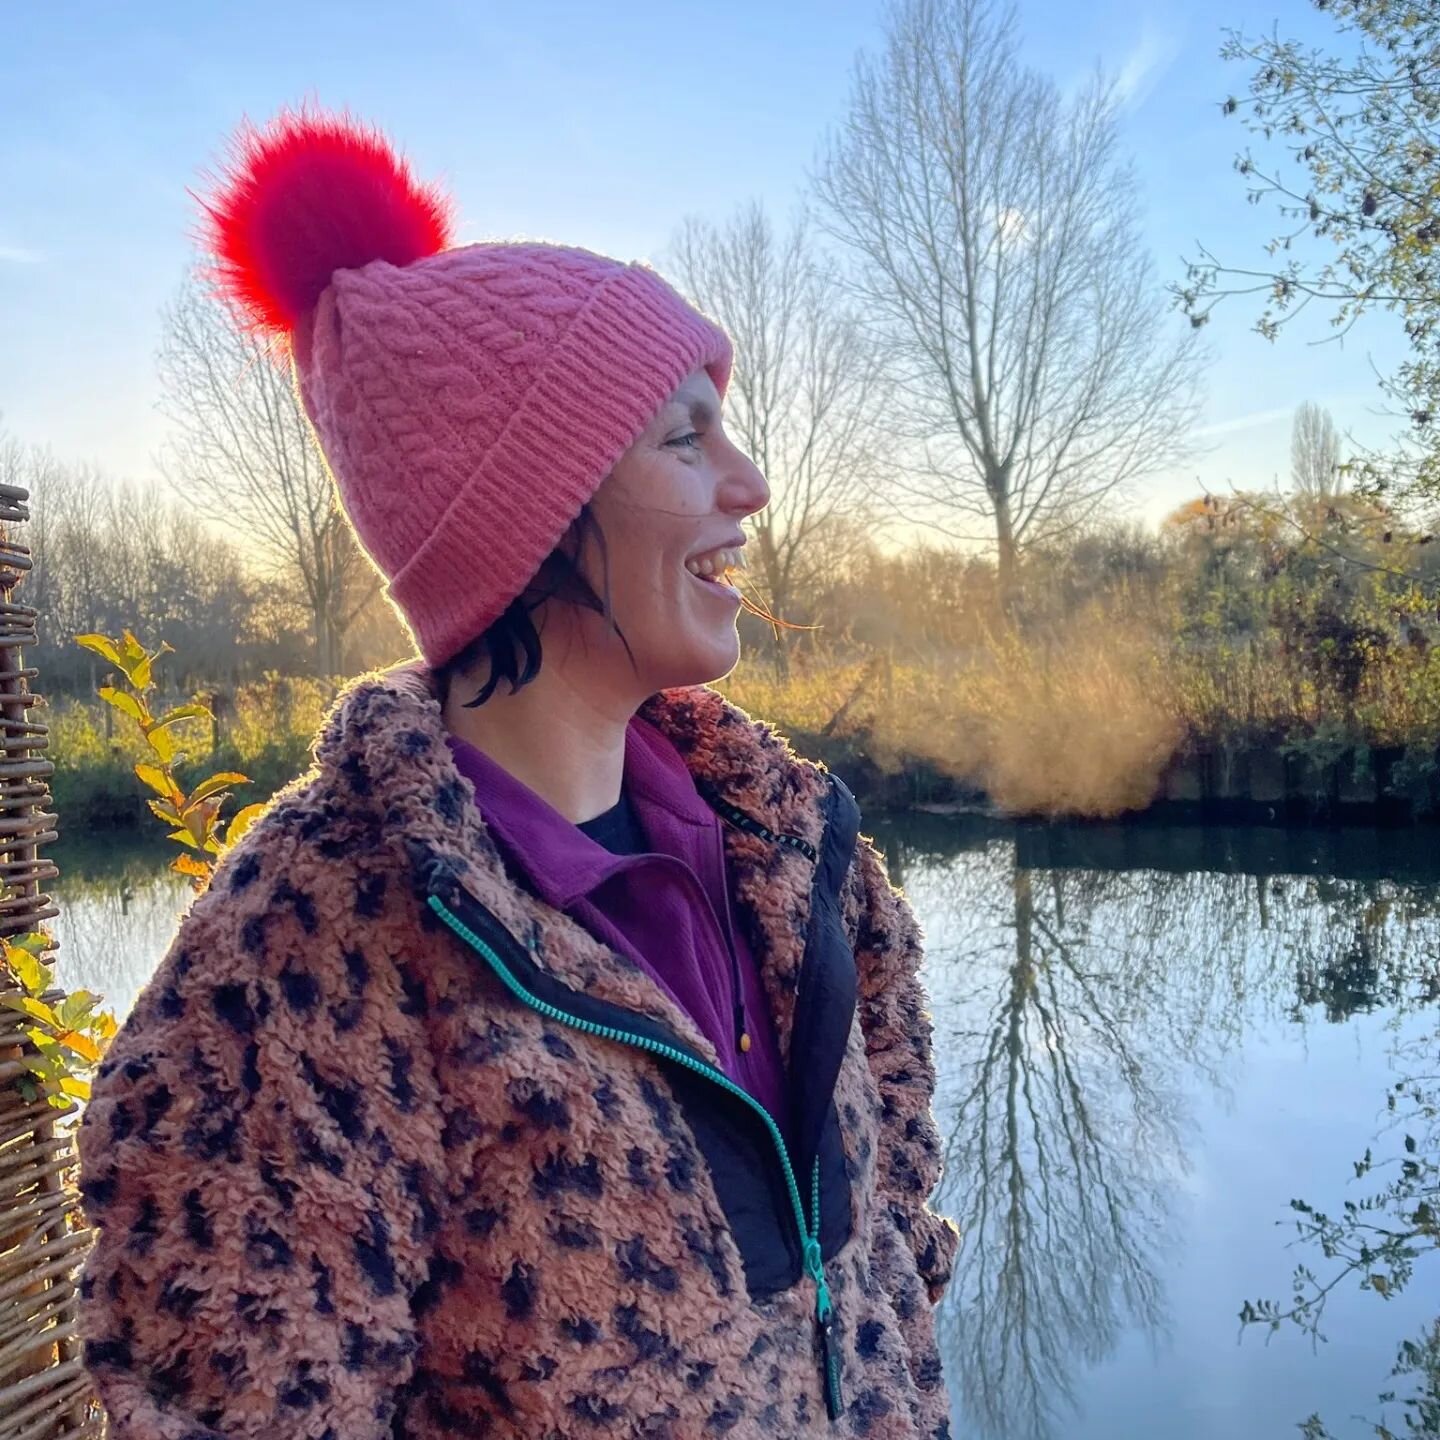 Glorious sunrise dip at Grantchester Meadows this morning 🌄

Thanks to my NBFs @emsilverwoodcope and @clearlyclarence for letting me tag along.

Felt absolutely welcomed into the river club Coven 🔮. Lots of X-rated chat and cackling - as there 💯 s